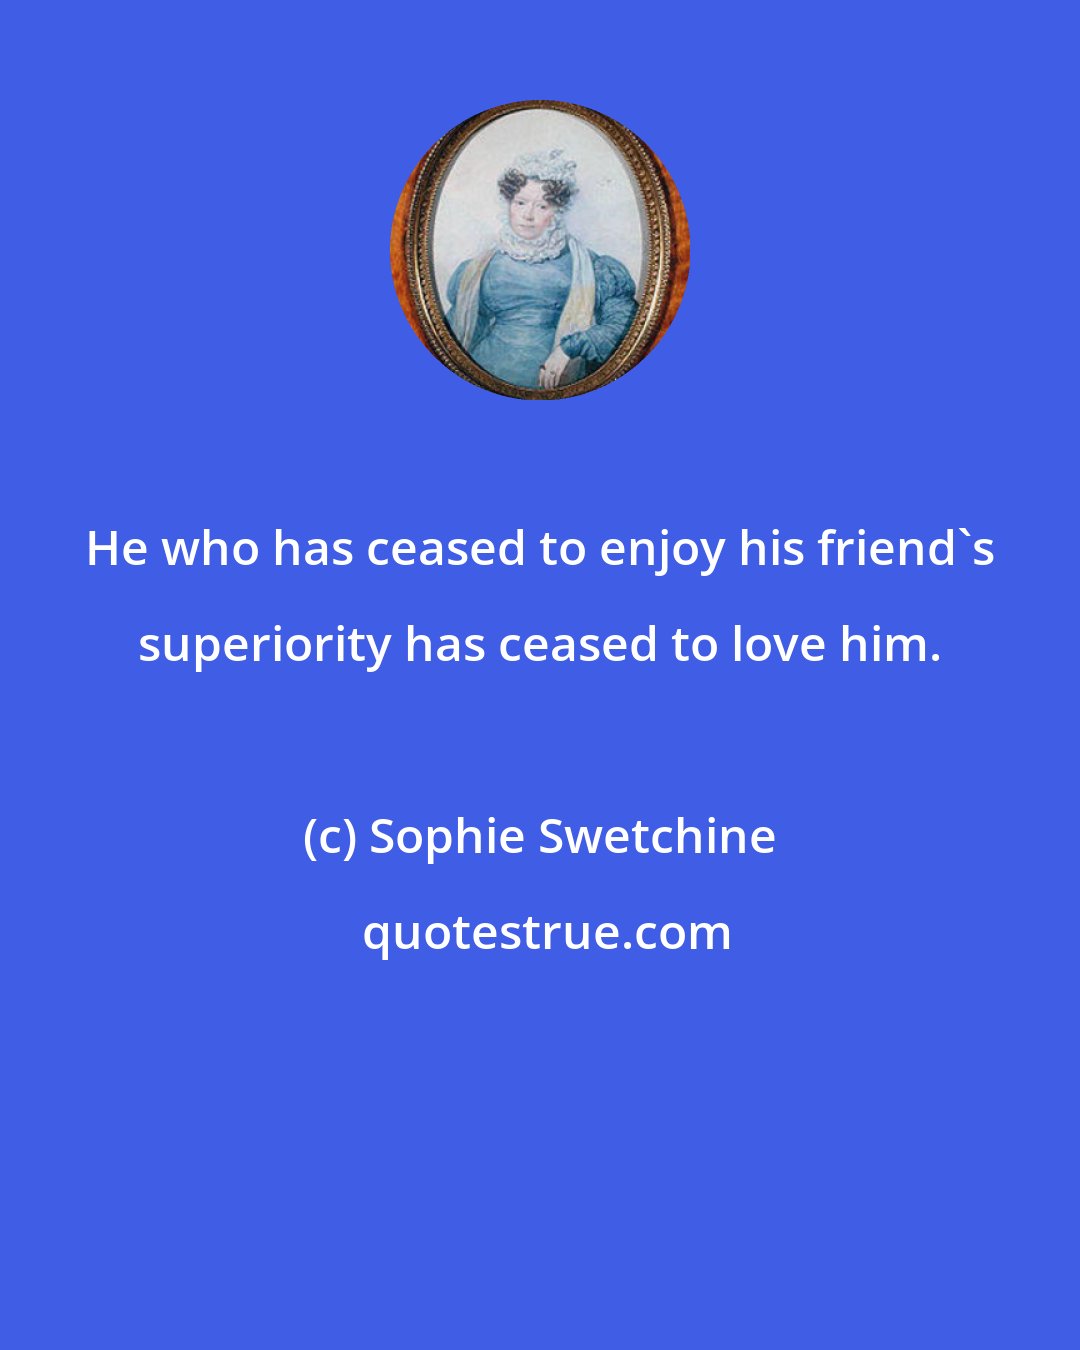 Sophie Swetchine: He who has ceased to enjoy his friend's superiority has ceased to love him.